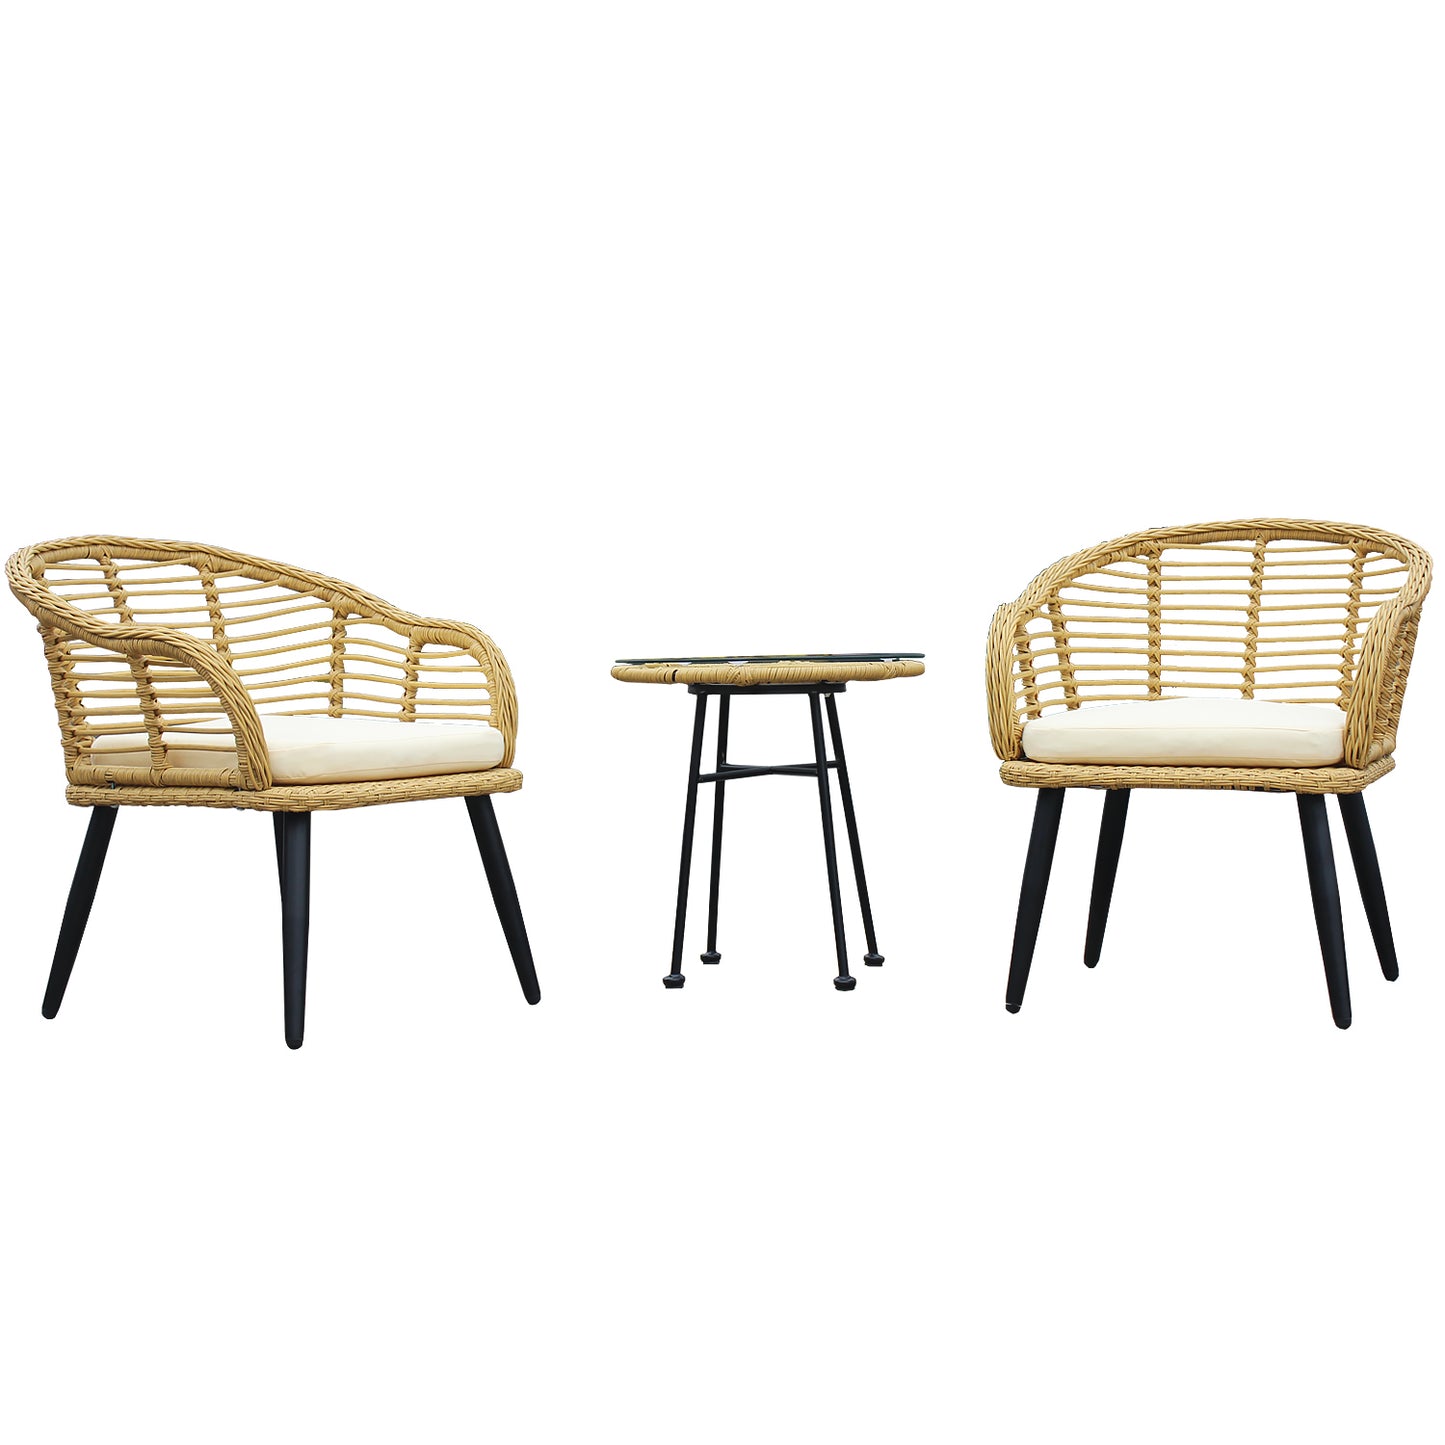 3 Pieces Outdoor Patio Balcony Natural Yellow Wicker Chair Table Set with Beige Cushion and Tempered Glass Table Top